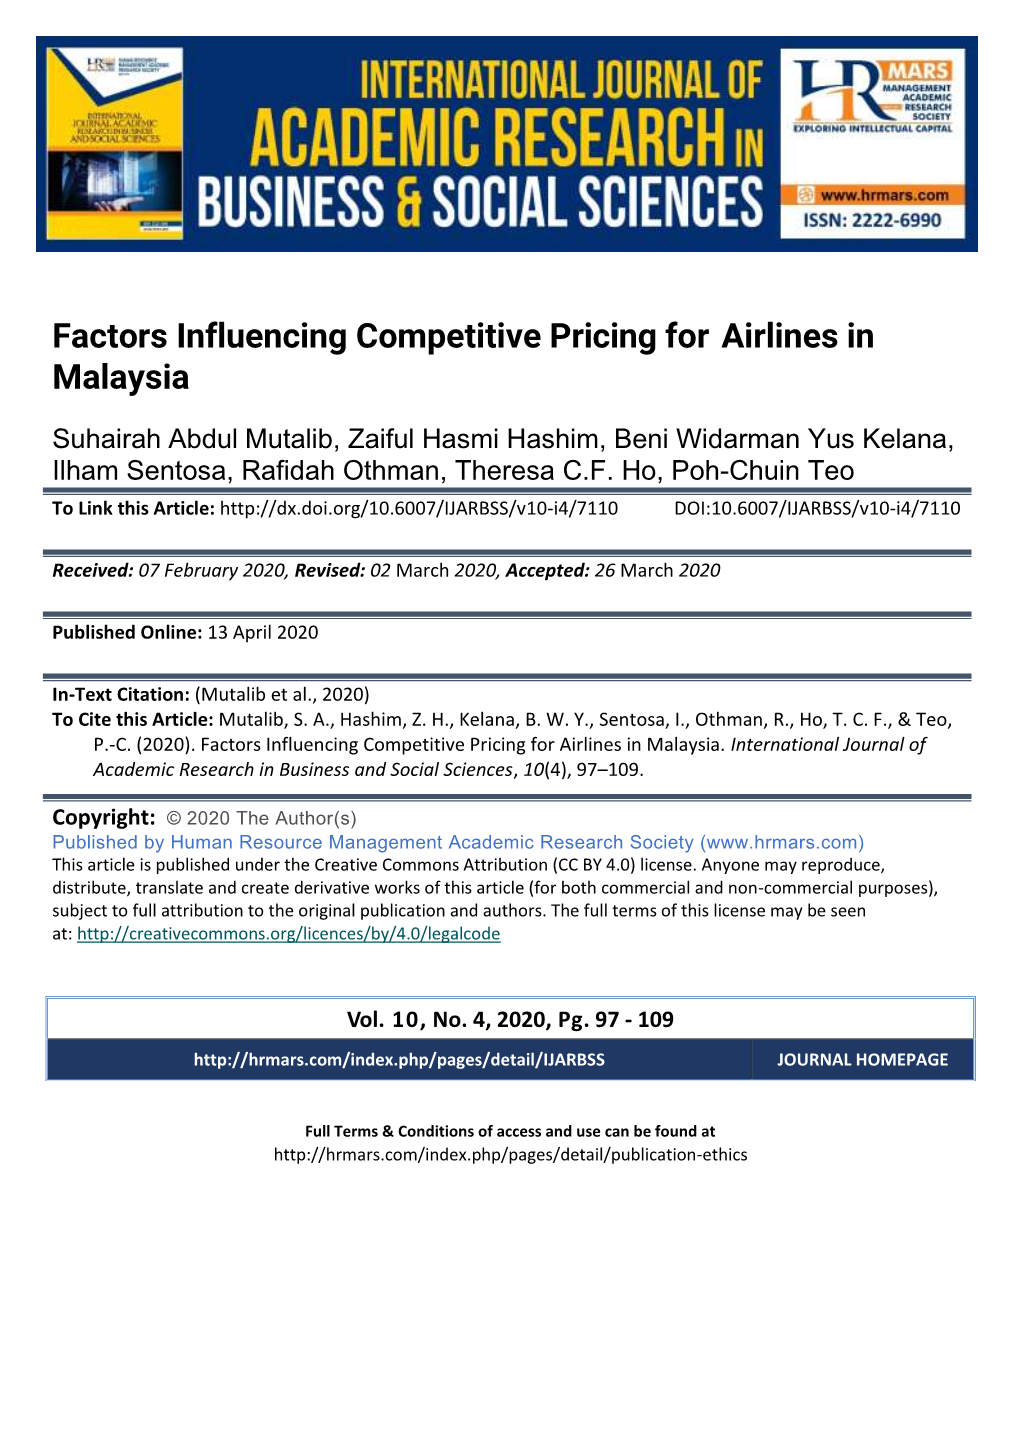 Factors Influencing Competitive Pricing for Airlines in Malaysia